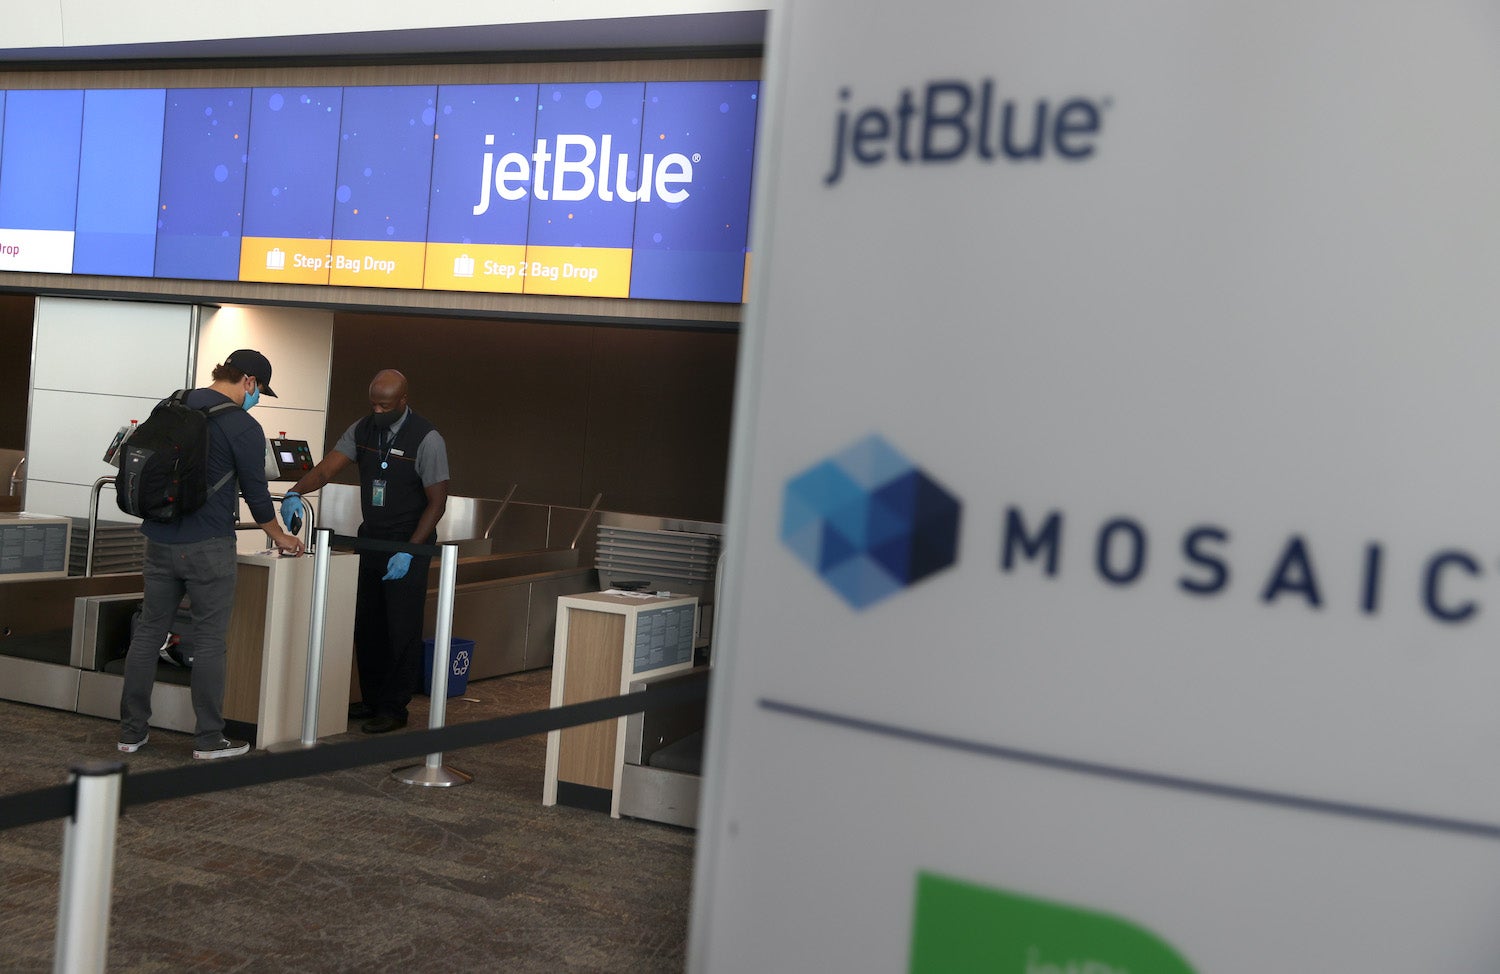 check-your-account-jetblue-mosaic-fast-track-offer-finally-posting